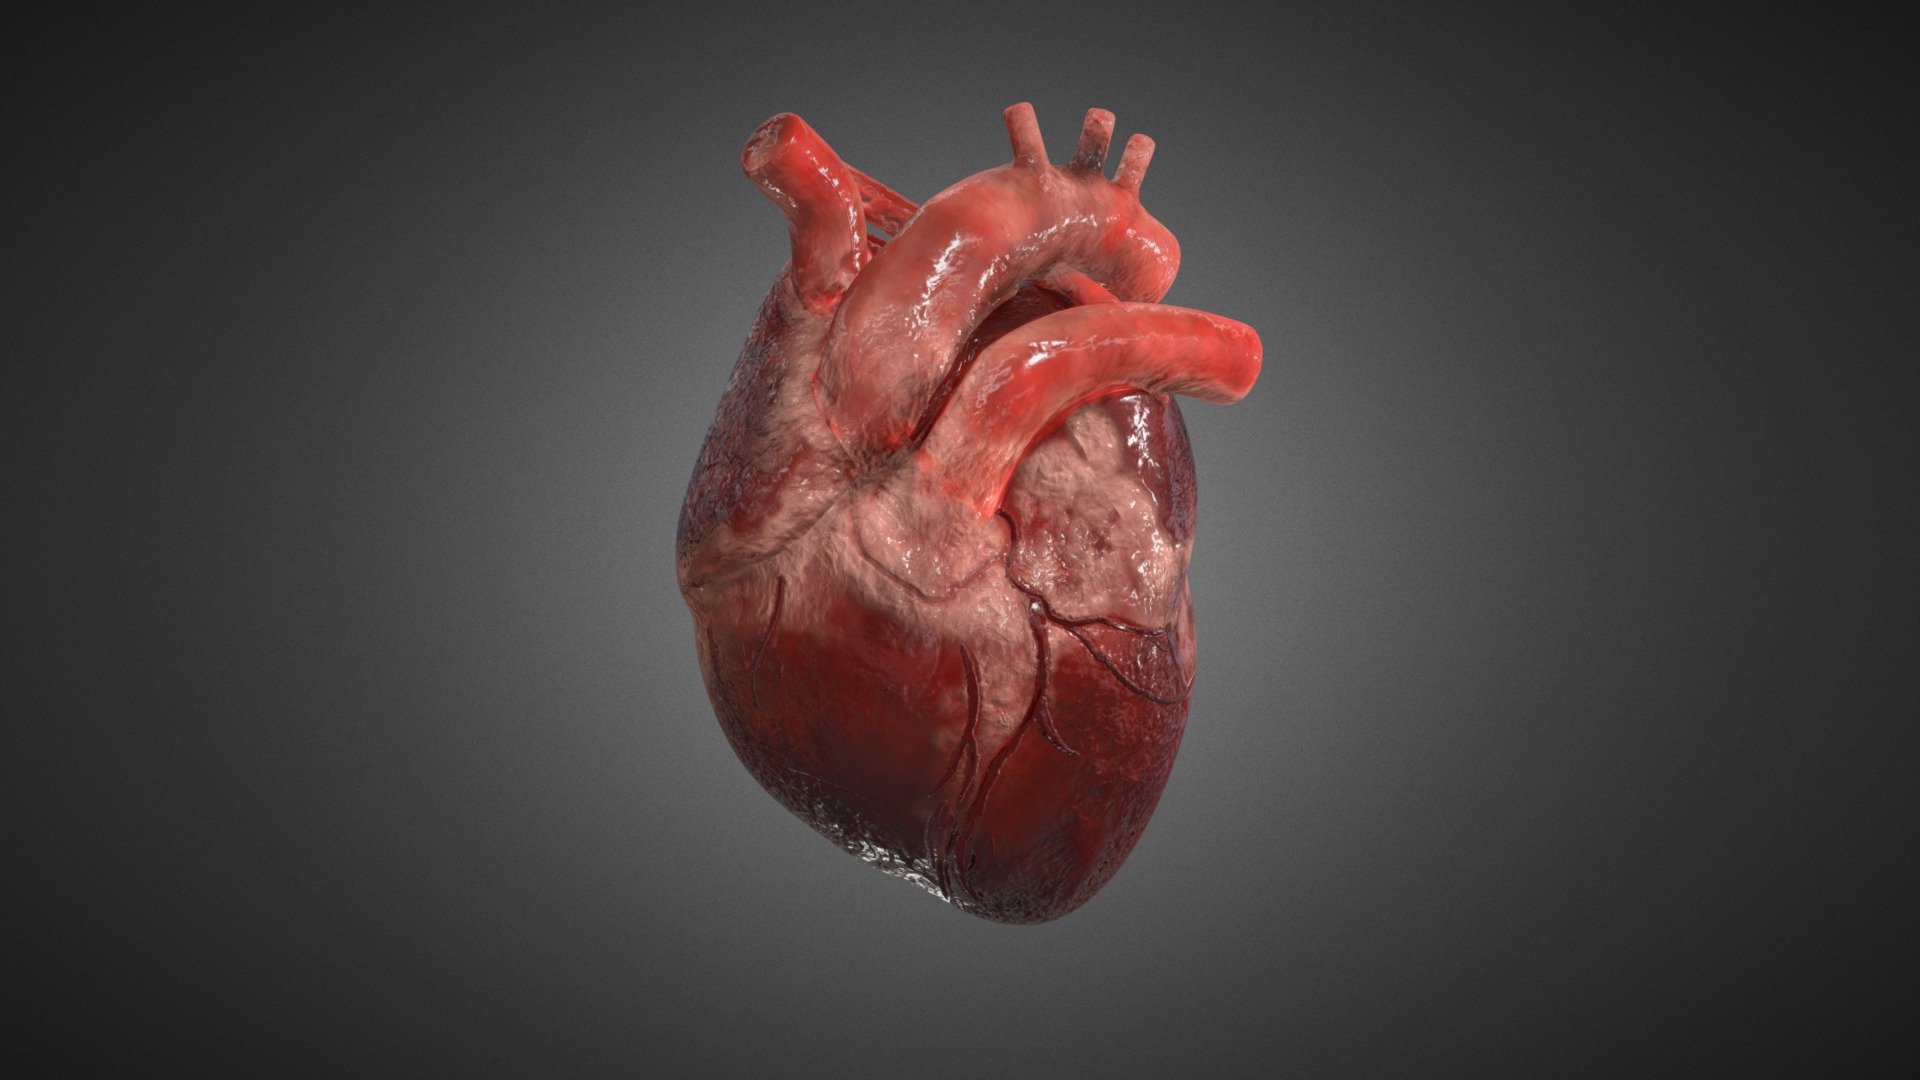 Realistic human heart model made to transform your 3D model experience. Ready to be used for digital laboratory setup, metaverse, human anatomy, AR/VR, educative videos etc. Finely detailed and textured that might give you a blood rush. Download it for free and get started.
.
For more such cool and interesting content follow us on: https://www.instagram.com/neshallads/
Drop Your Comments &amp; Reviews!

Visit Us! https://neshallads.com/ - Realistic Human Heart - Download Free 3D model by neshallads 3d model